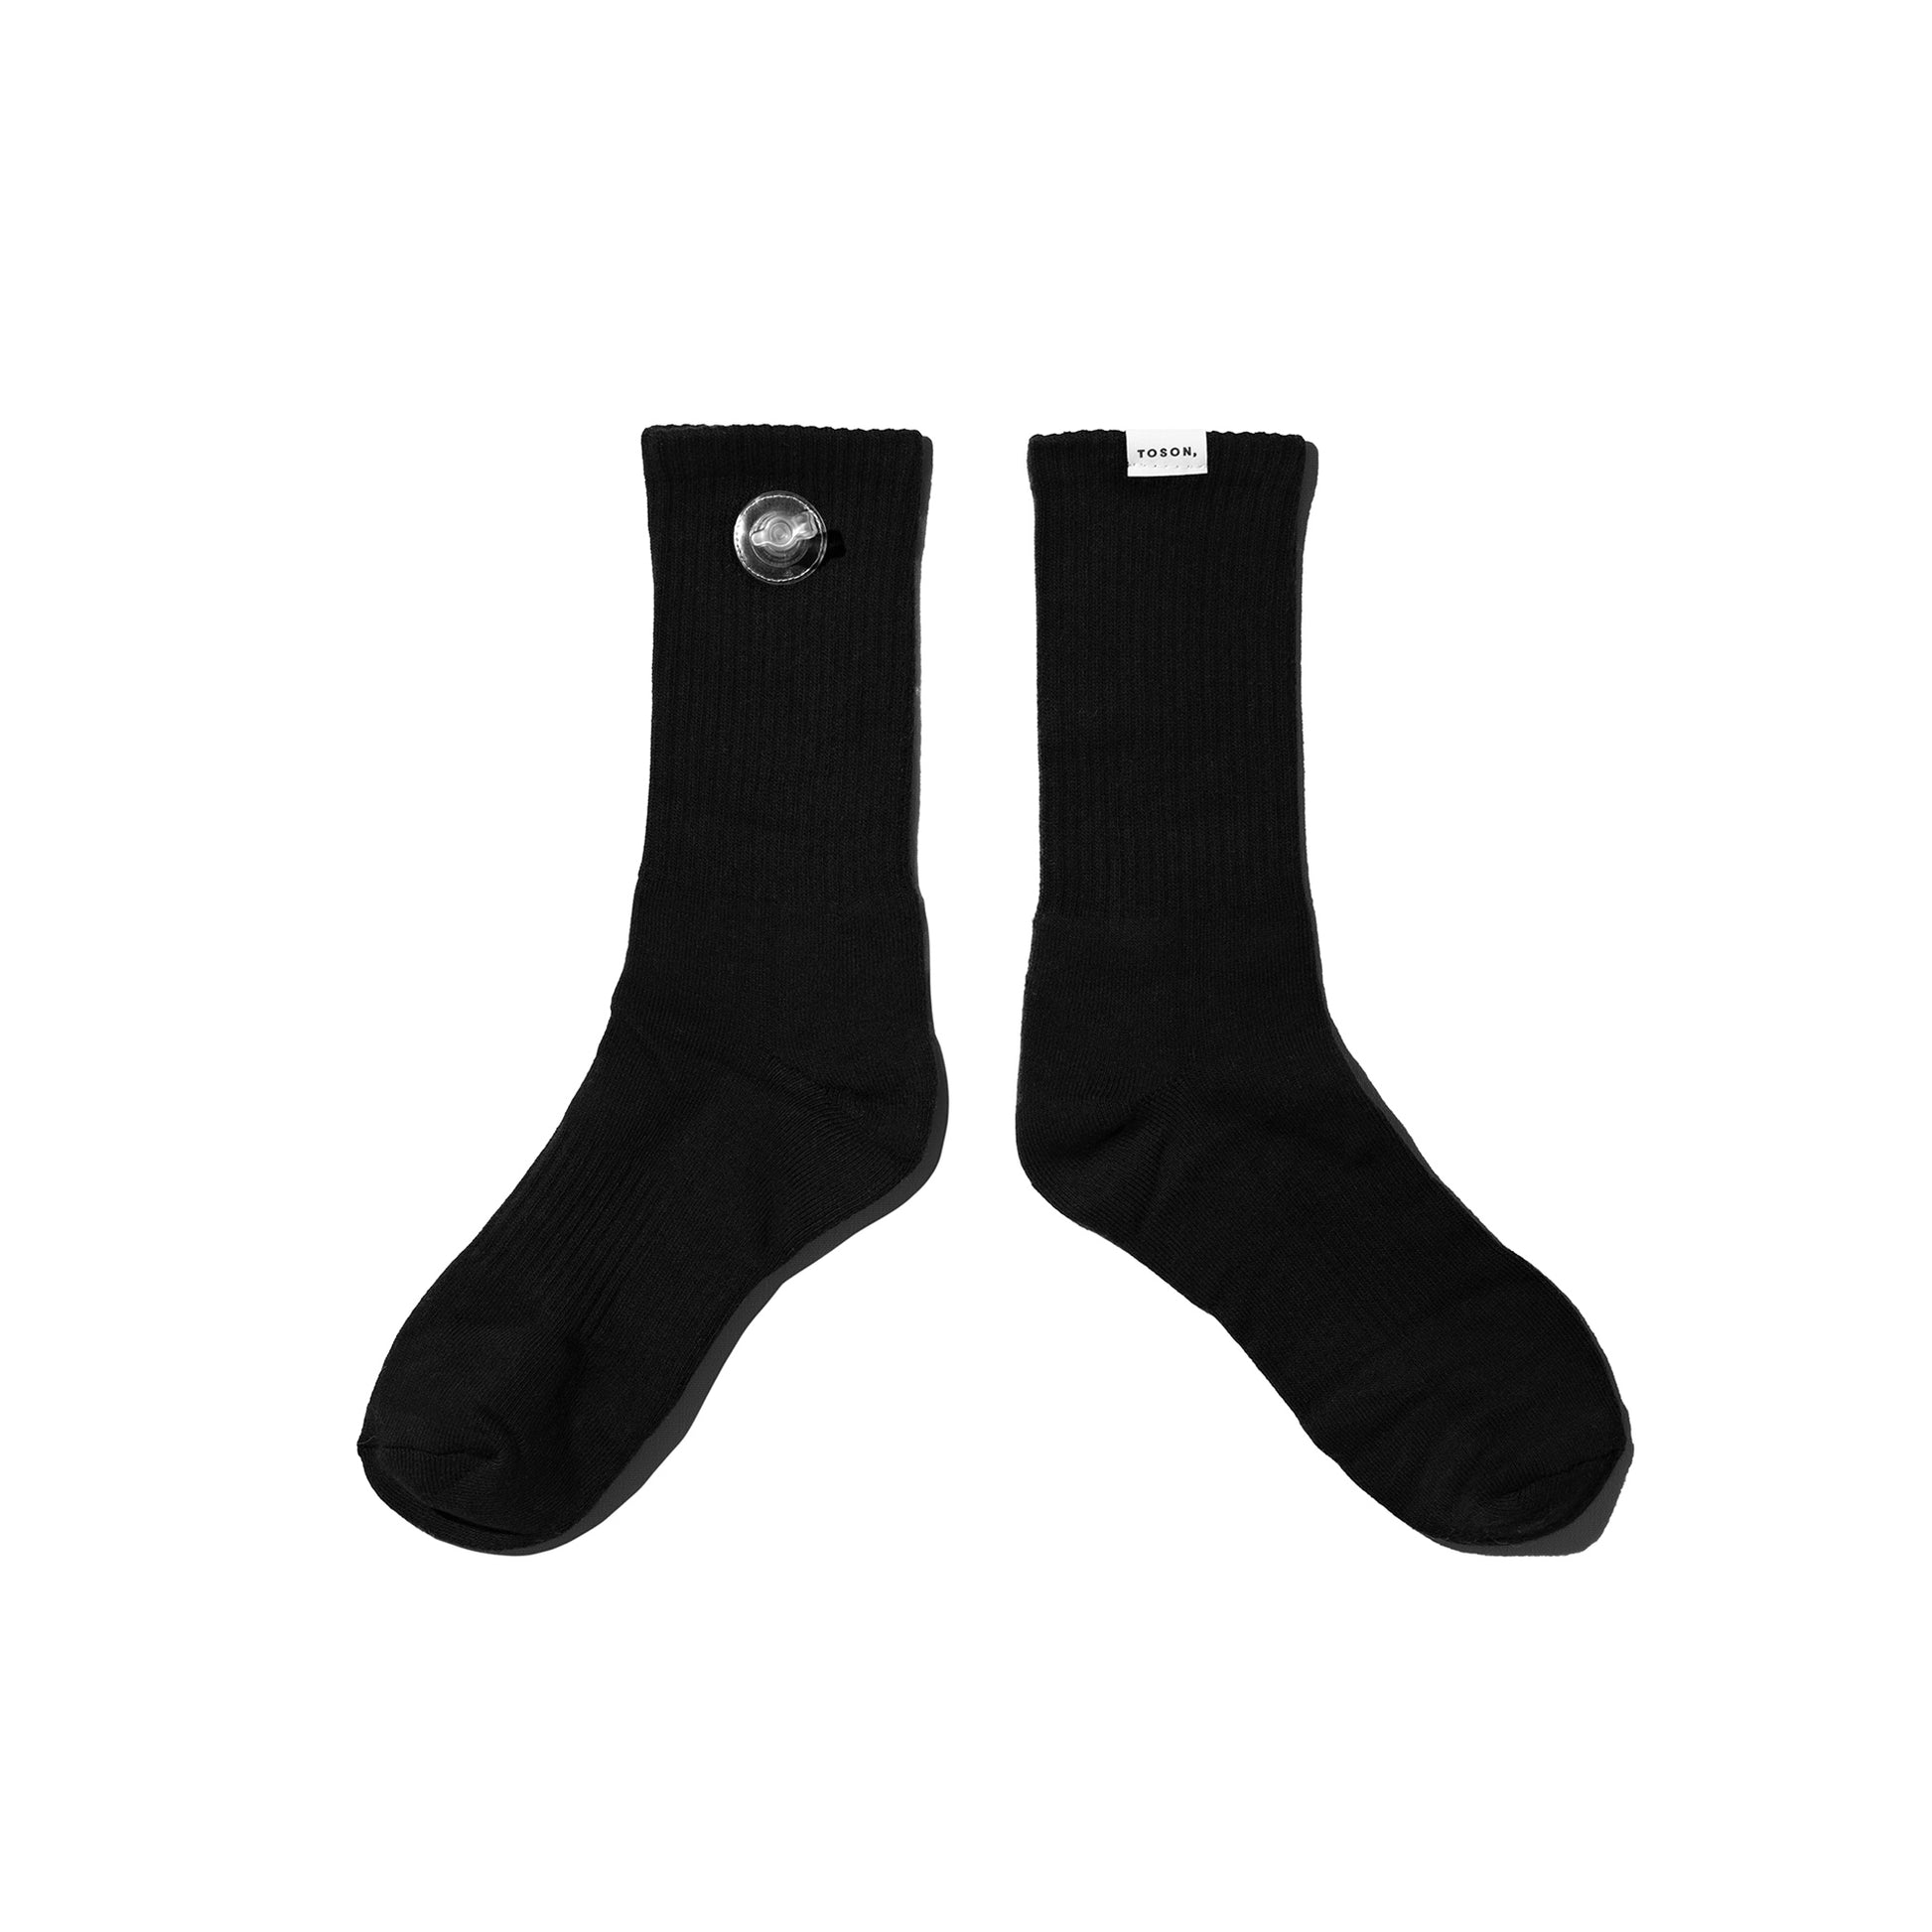 Toson, Inflatable Socks 2 Pack in Black + White